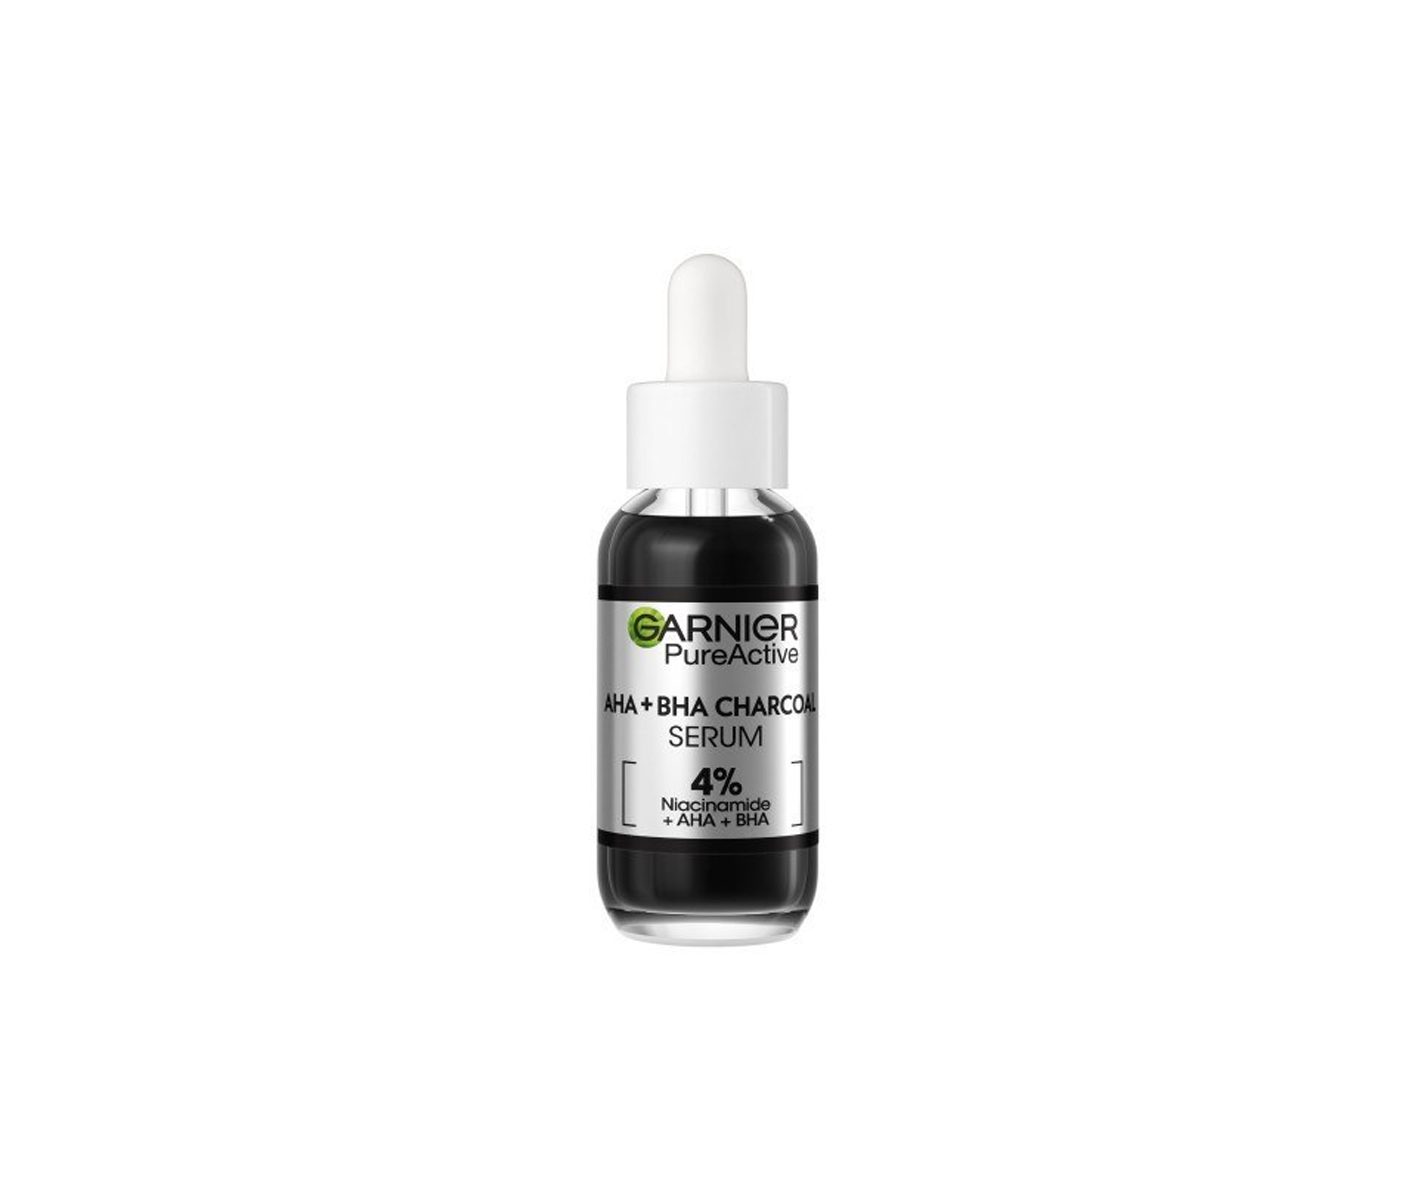 Garnier, Pure Active, anti-imperfection serum with AHA, BHA and carbon acids